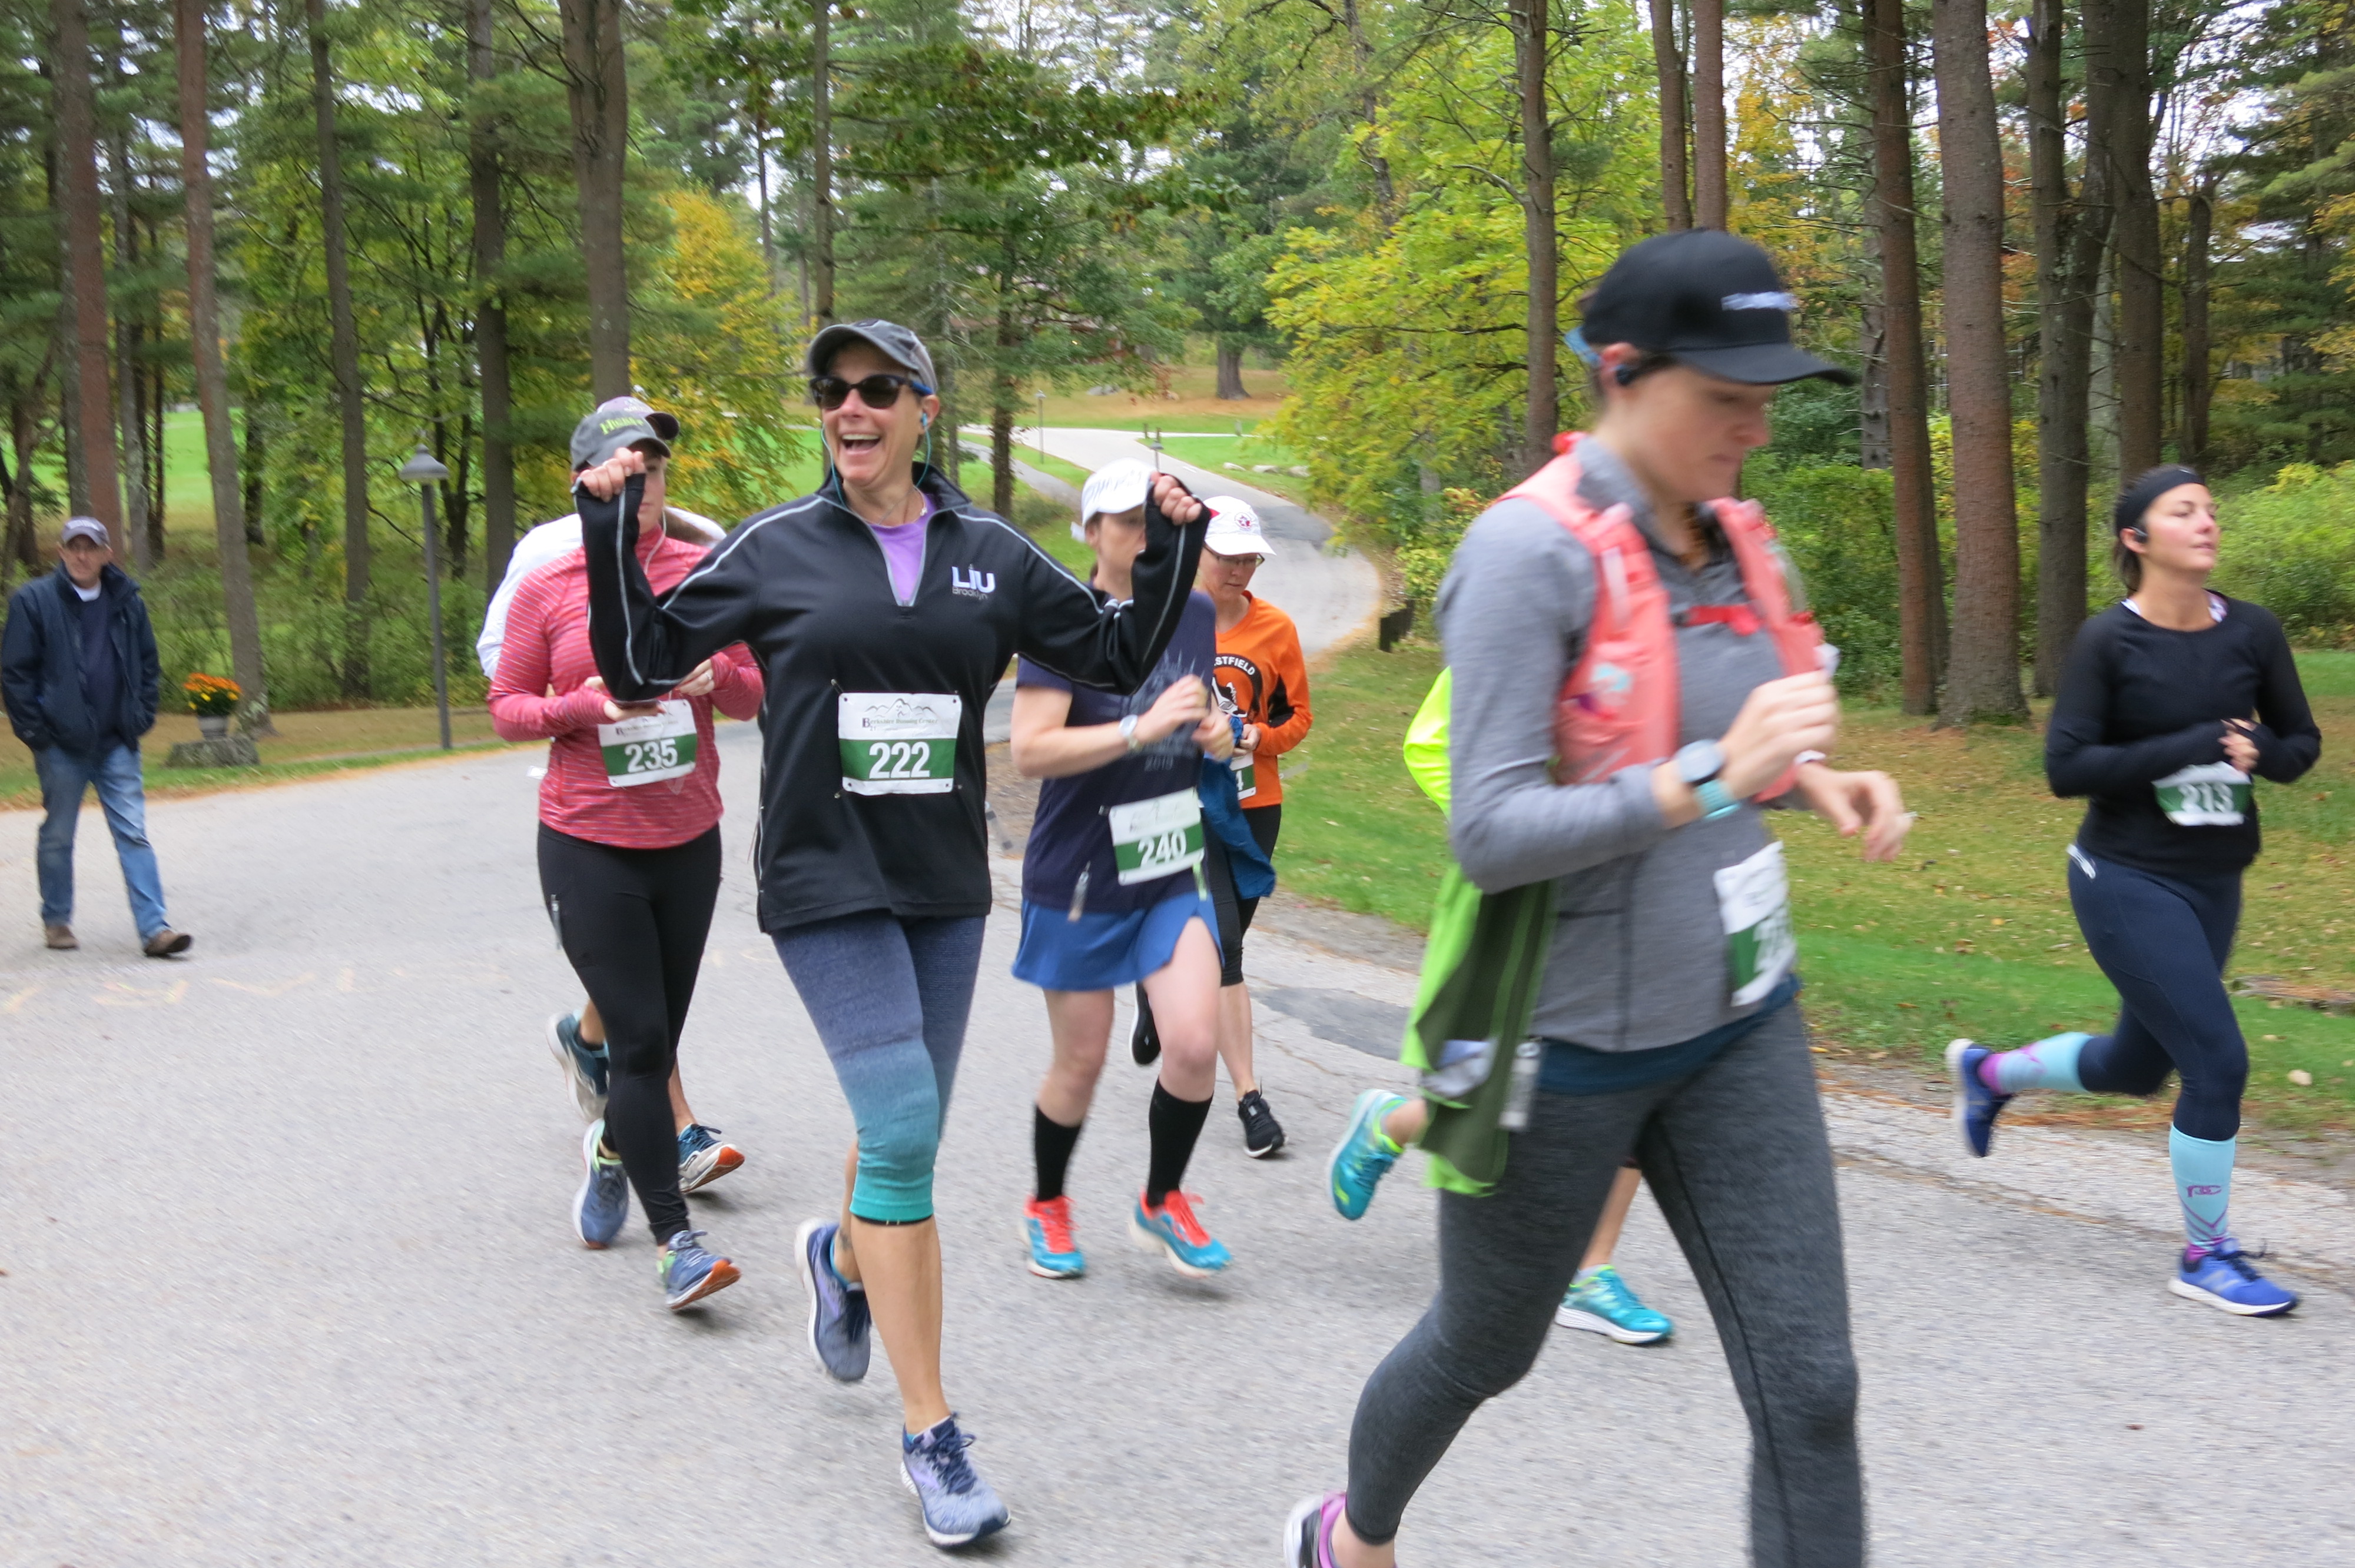 2019 Run for the Hills runners on the go